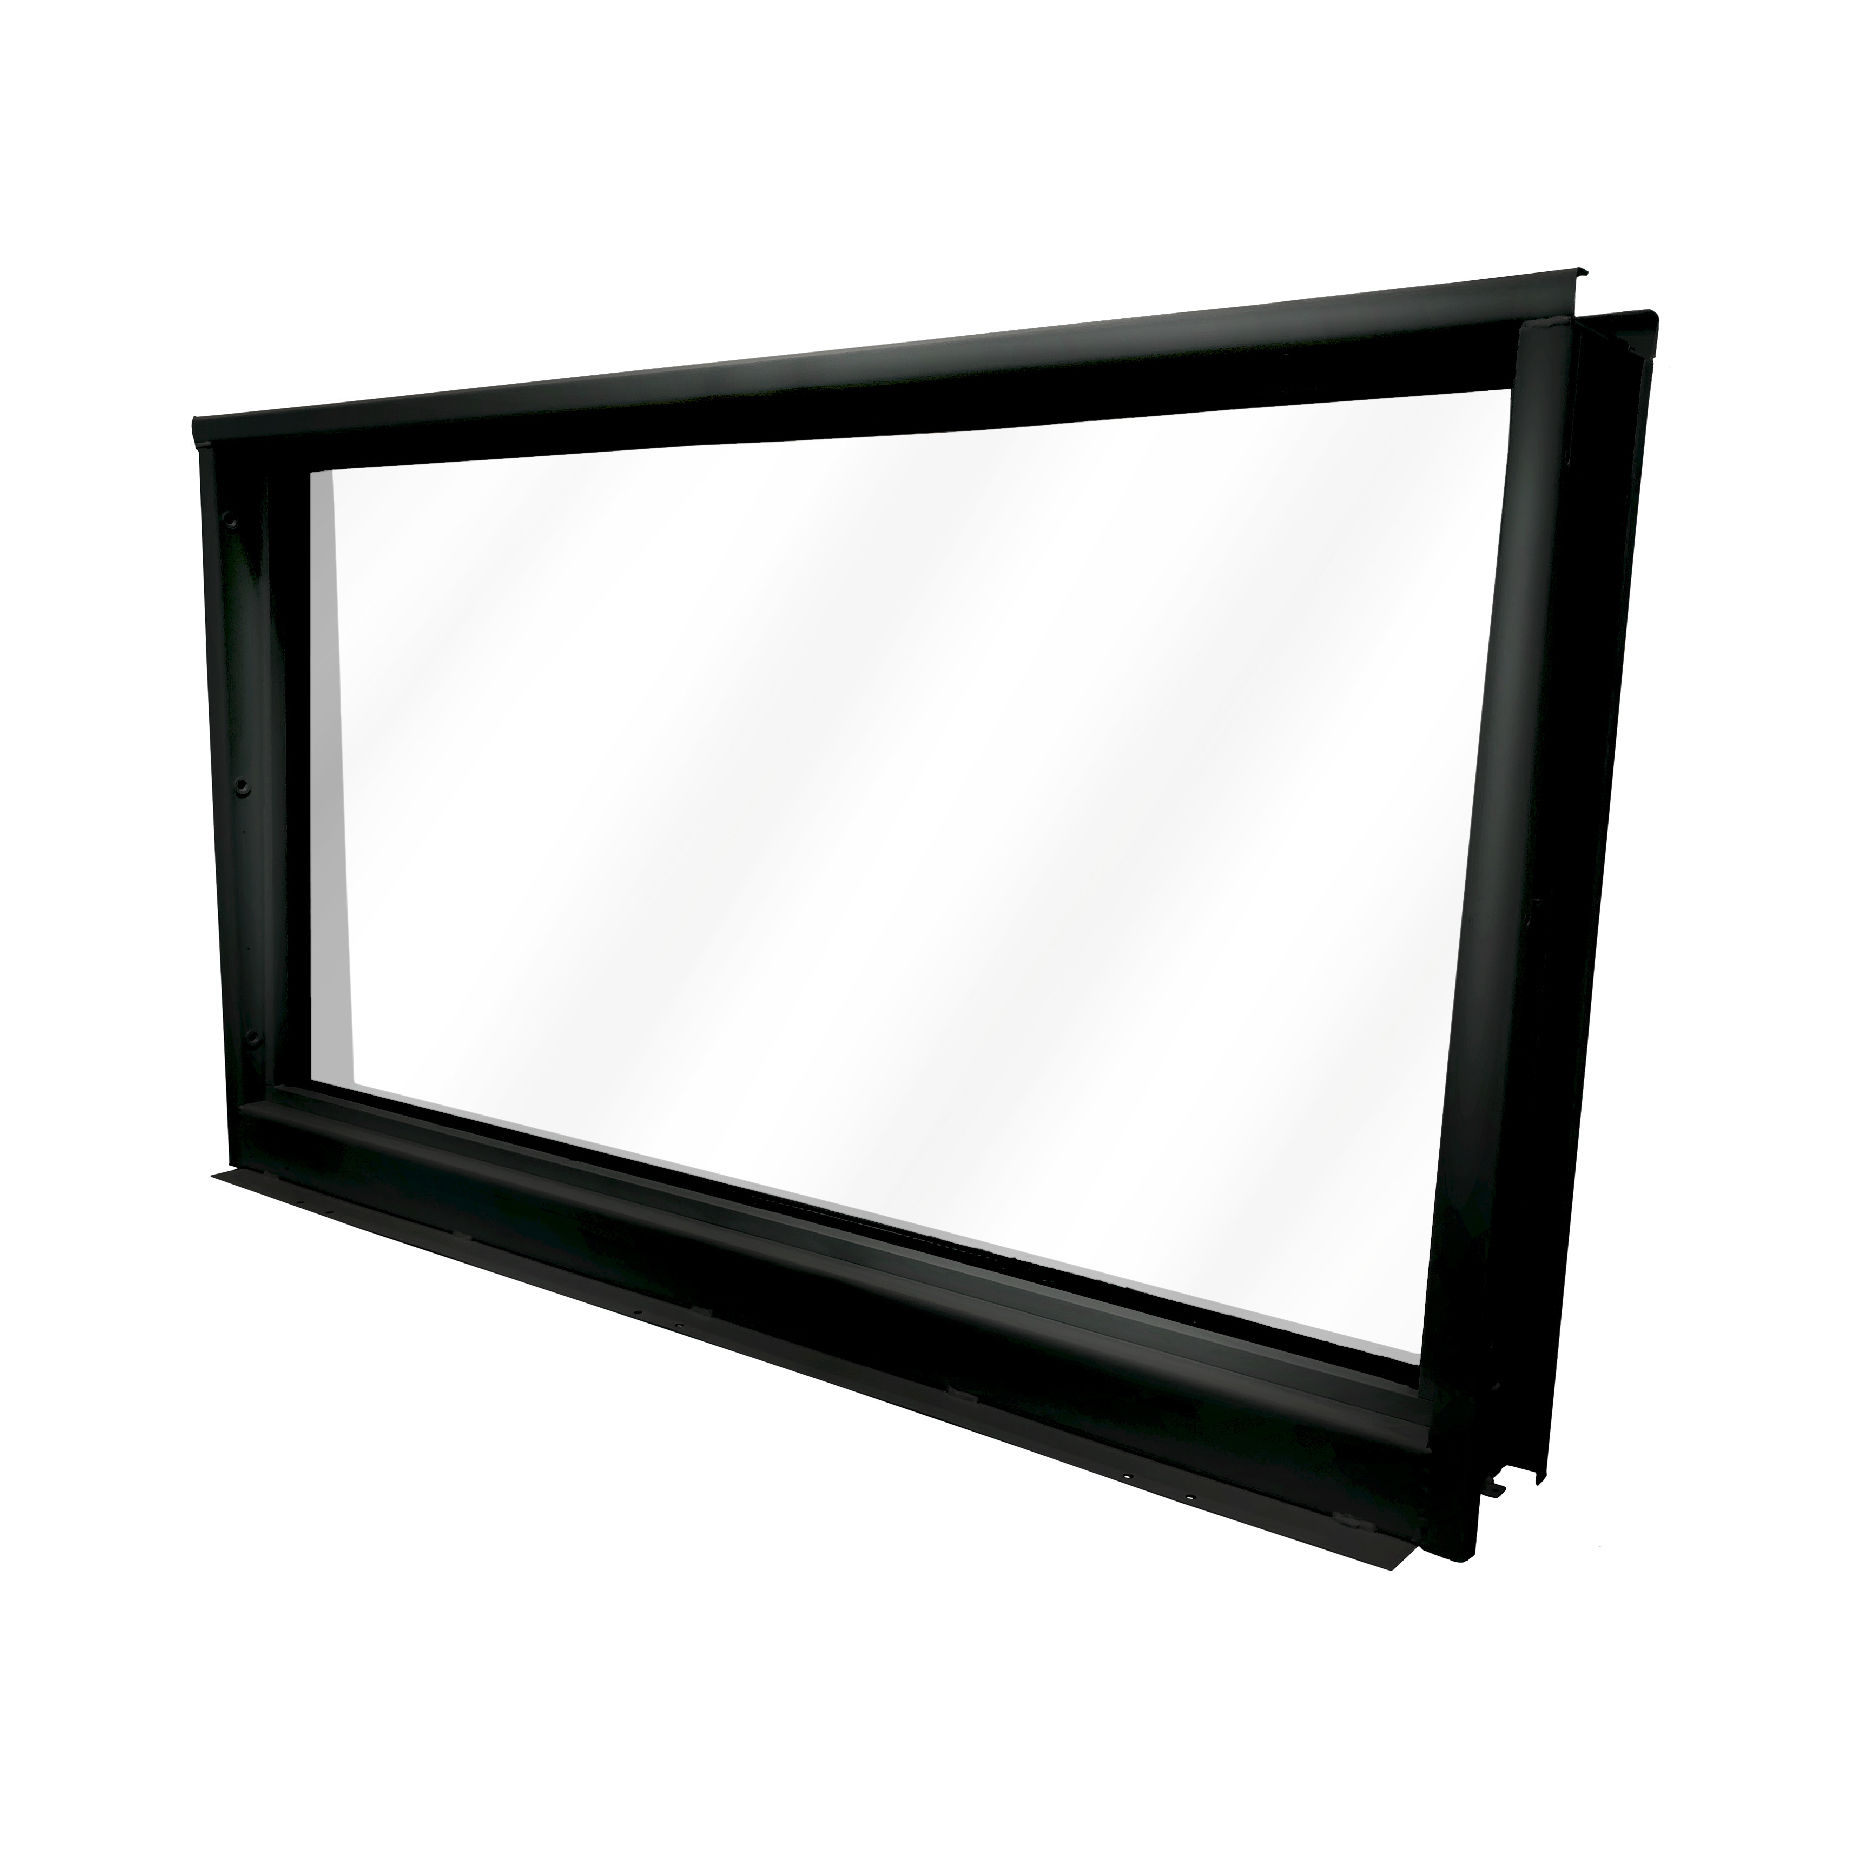 Picture for category 32x32 Premium Security Window - 12000987